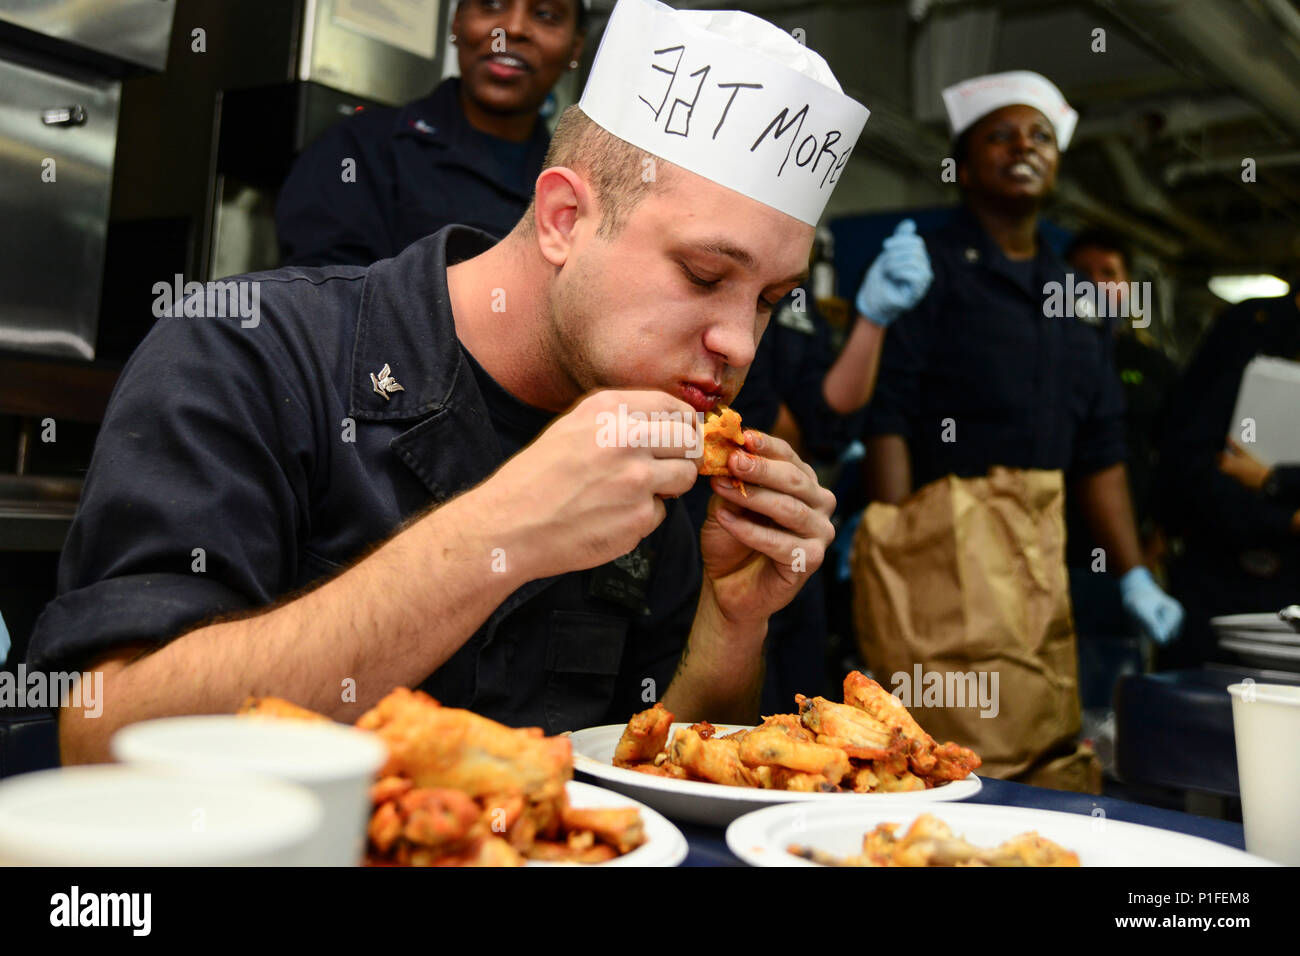 161025-N-GN619-110 ATLANTIC OCEAN (Oct. 24, 2016) Petty Officer 3rd Class Jason Goodpaster, from Lawrenceburg, Kentucky, eats chicken wings during a Wing Eating Contest held on the mess decks of the aircraft carrier USS George Washington (CVN 73). George Washington, homeported in Norfolk, is currently underway conducting carrier qualifications in the Atlantic Ocean. (U.S. Navy photo by Petty Officer 2nd Class Kris R. Lindstrom) Stock Photo